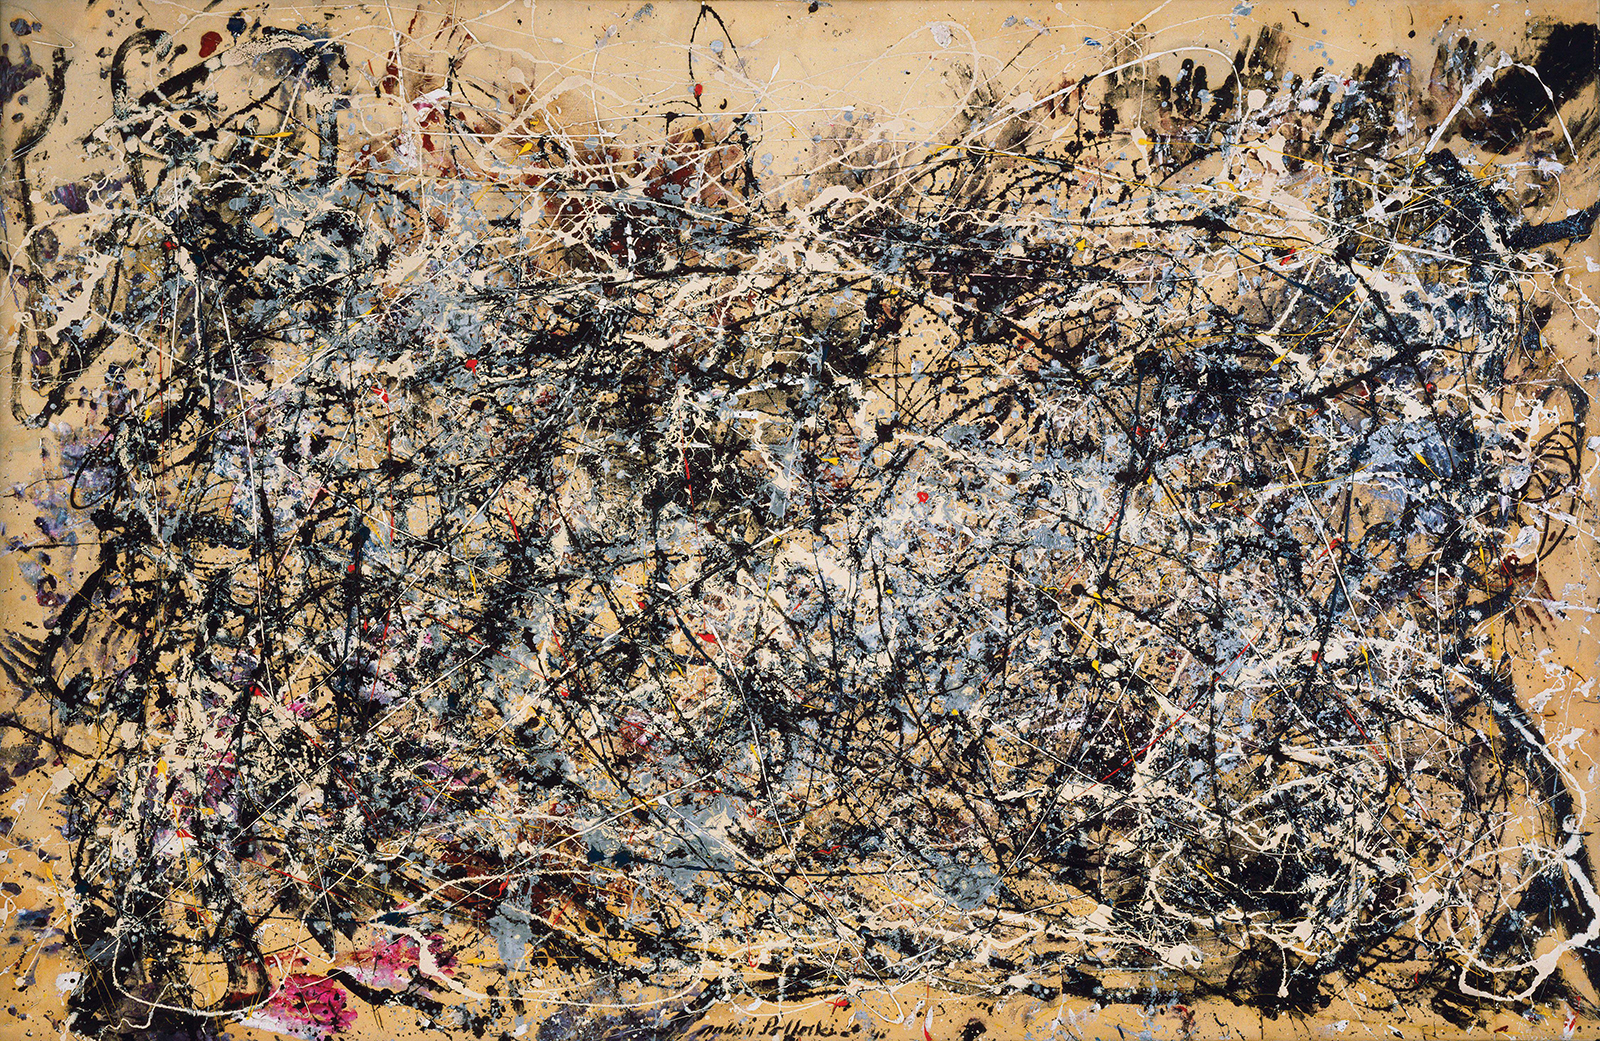 Jackson Pollock's 'number 1a' painting